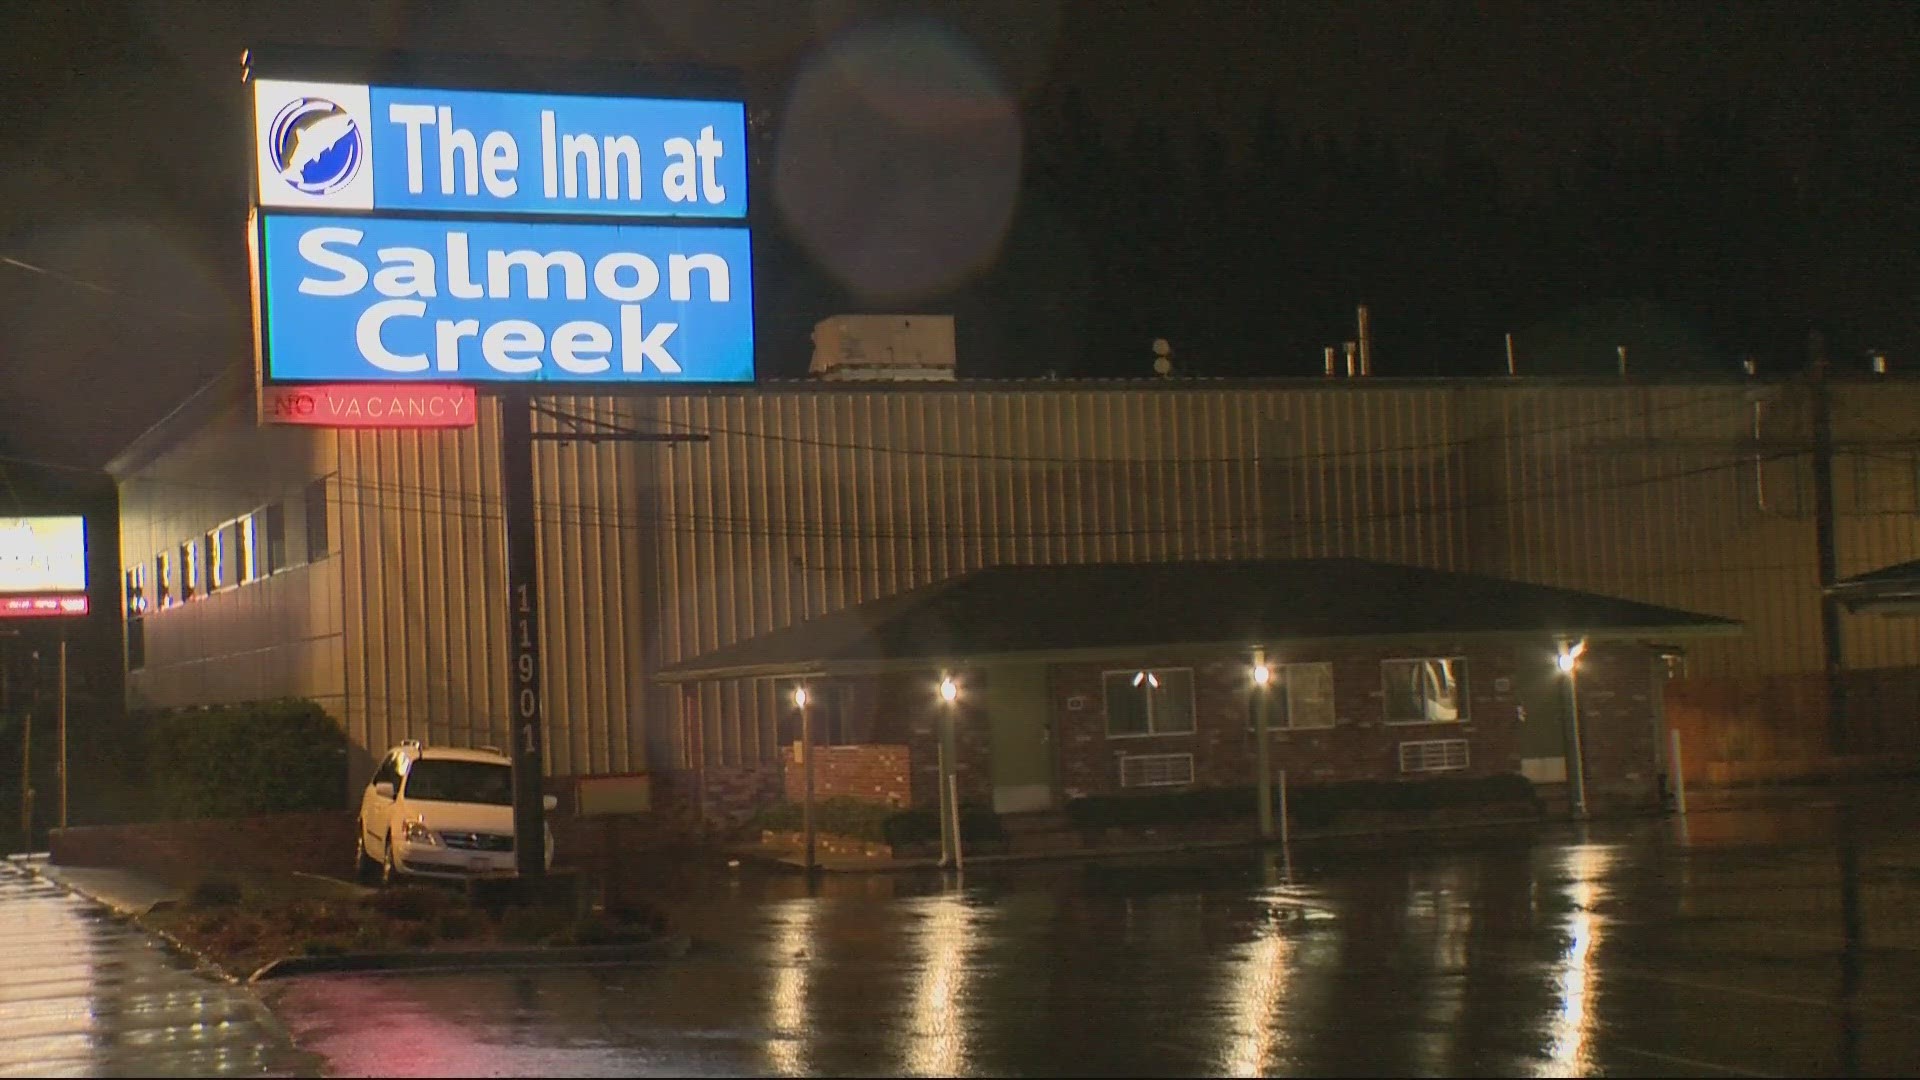 Firefighters found a body inside one of the units at a Salmon Creek inn.